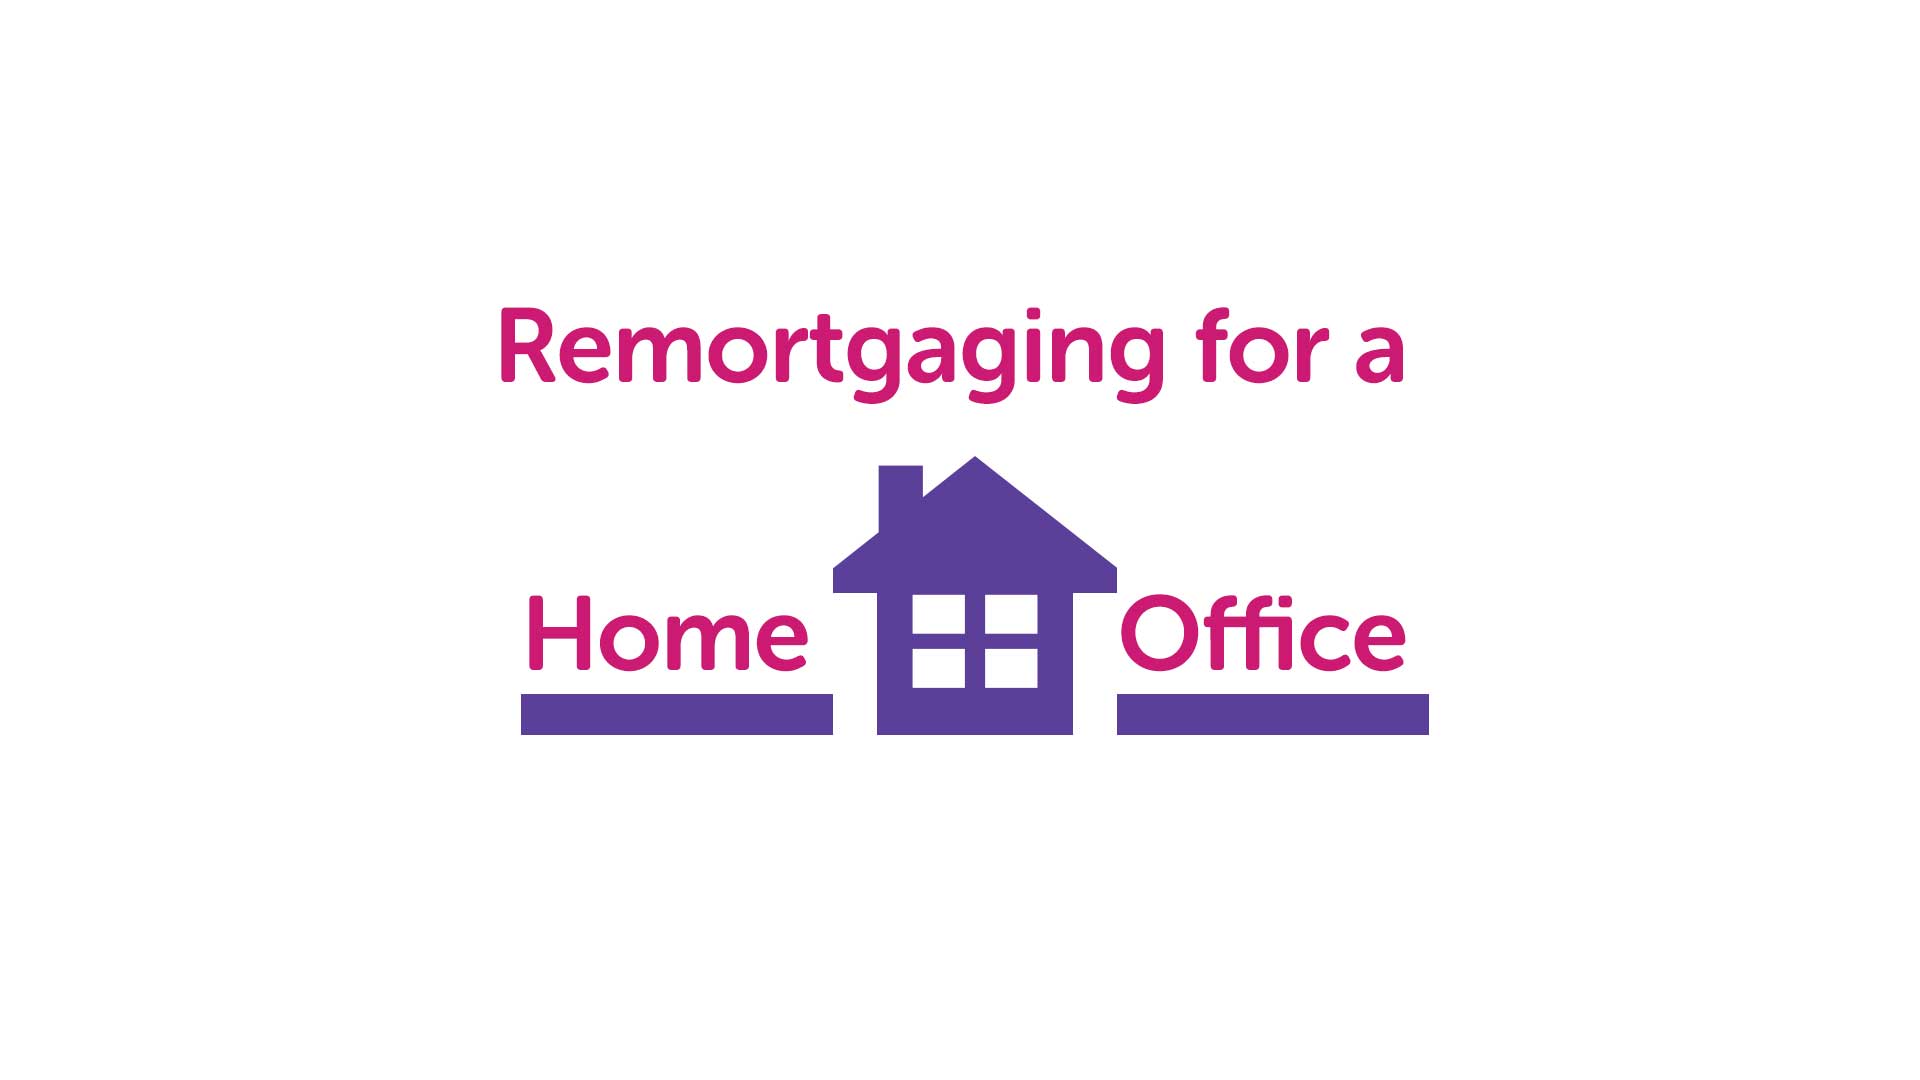 Remortgage for a Home Office in Harrogate